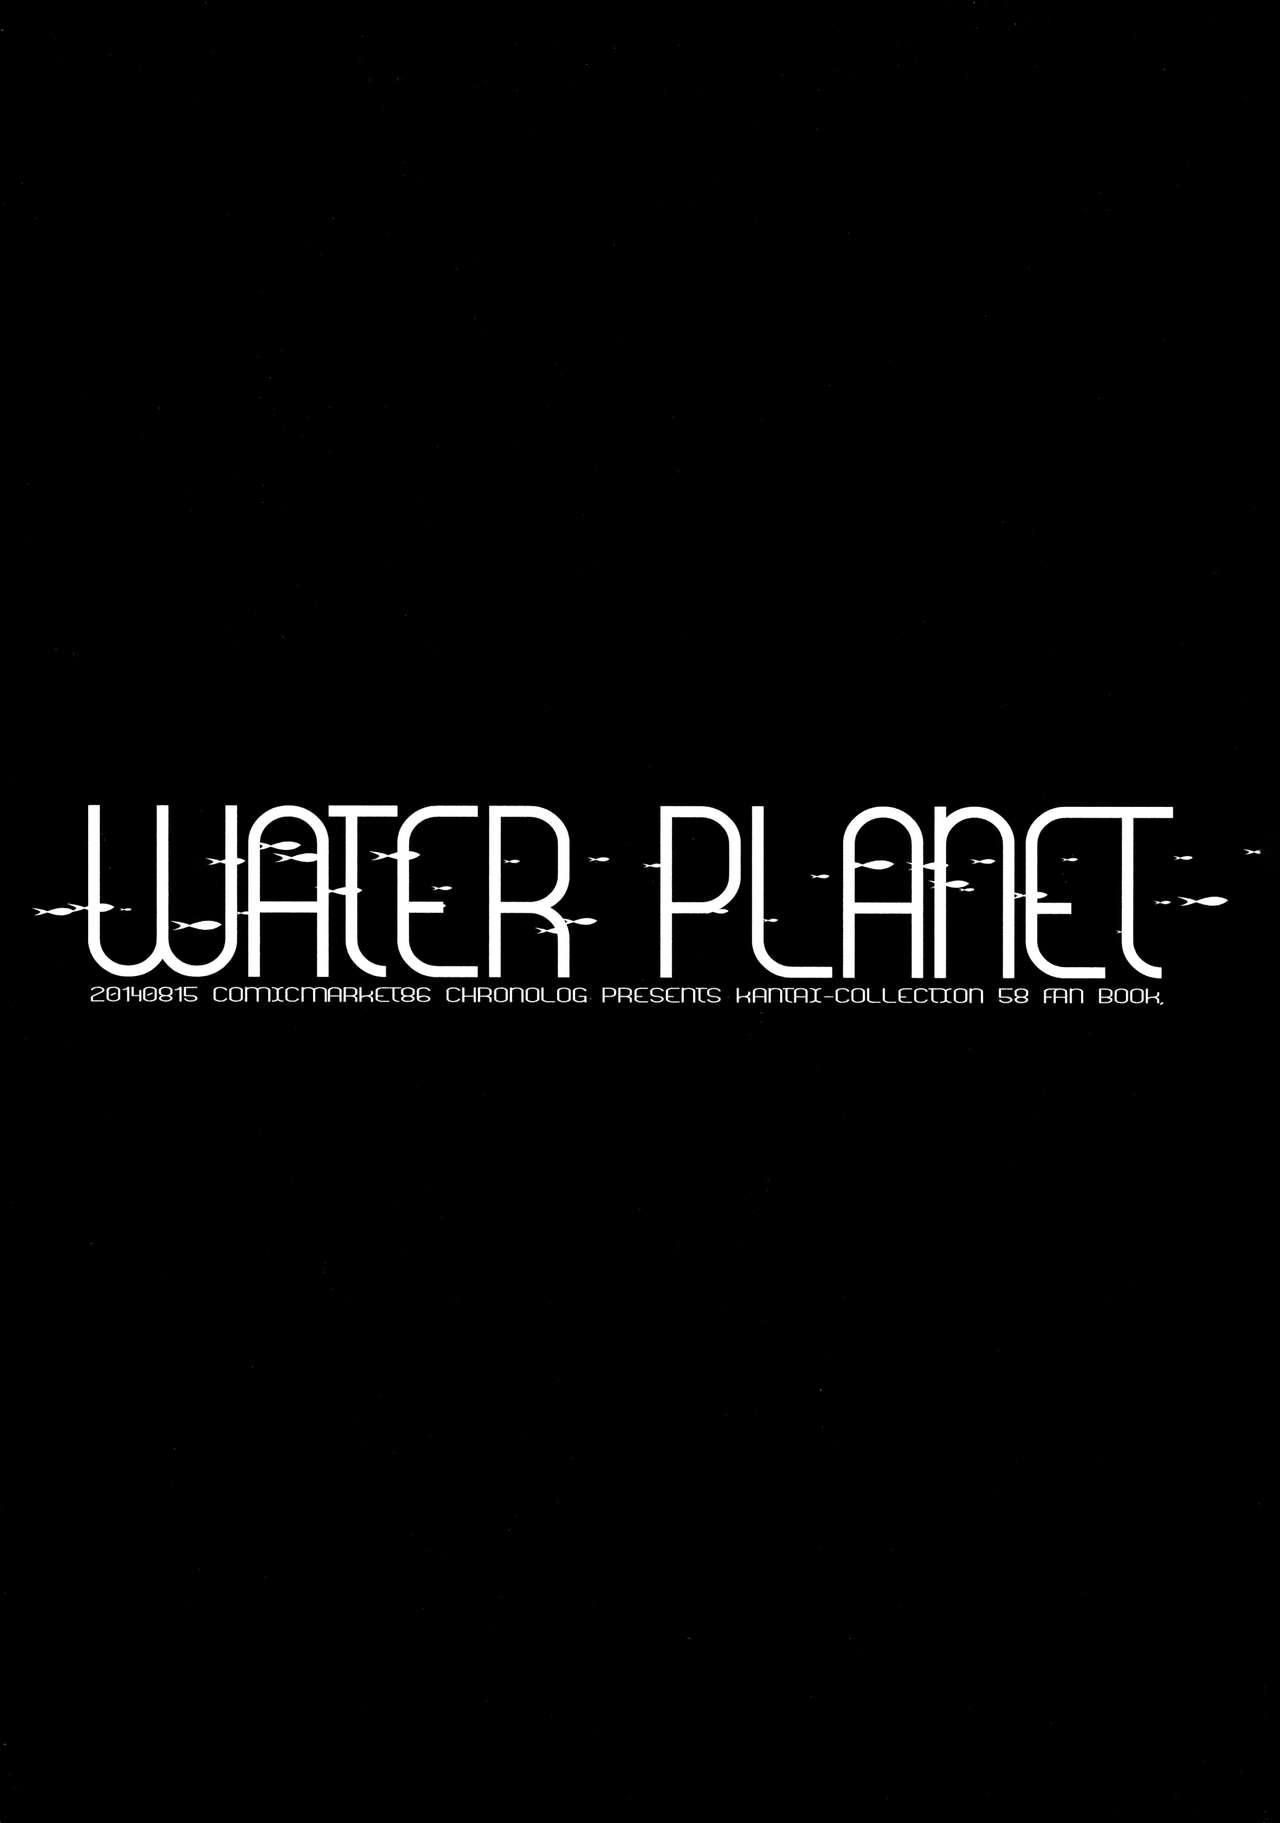 WATER PLANET. 1